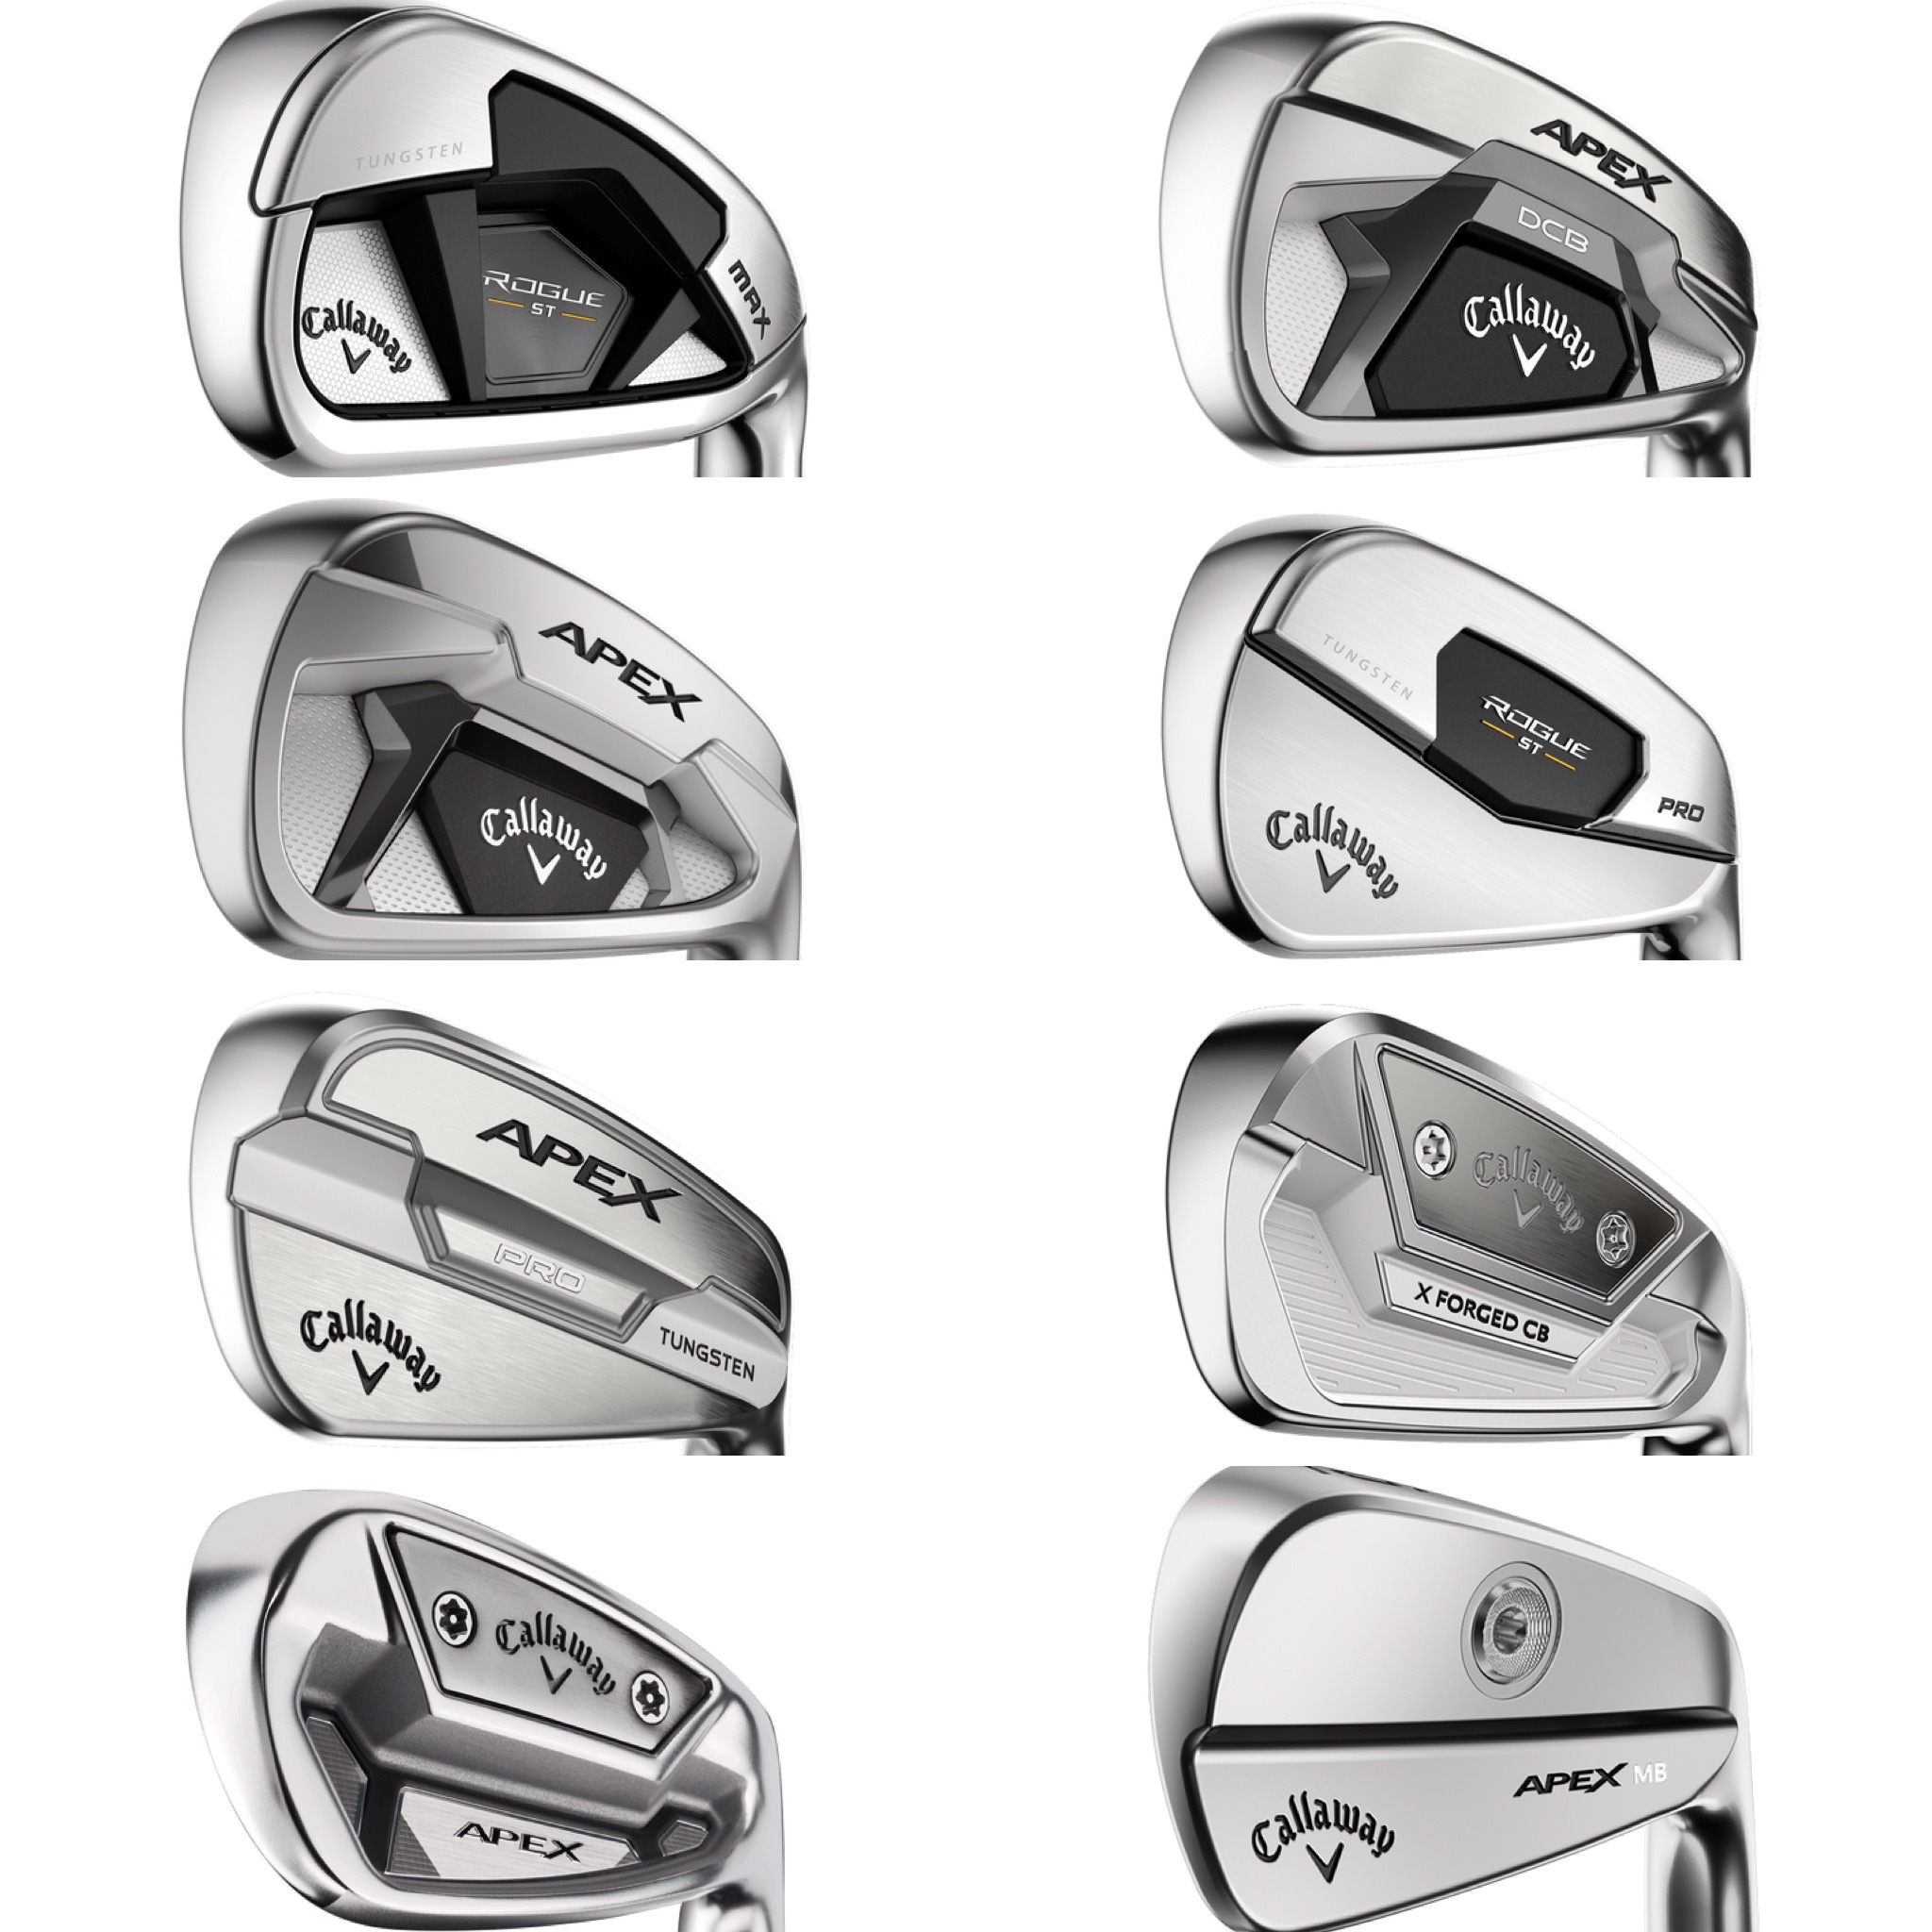 101: A Simple Guide to Callaway Irons - World of Wunder